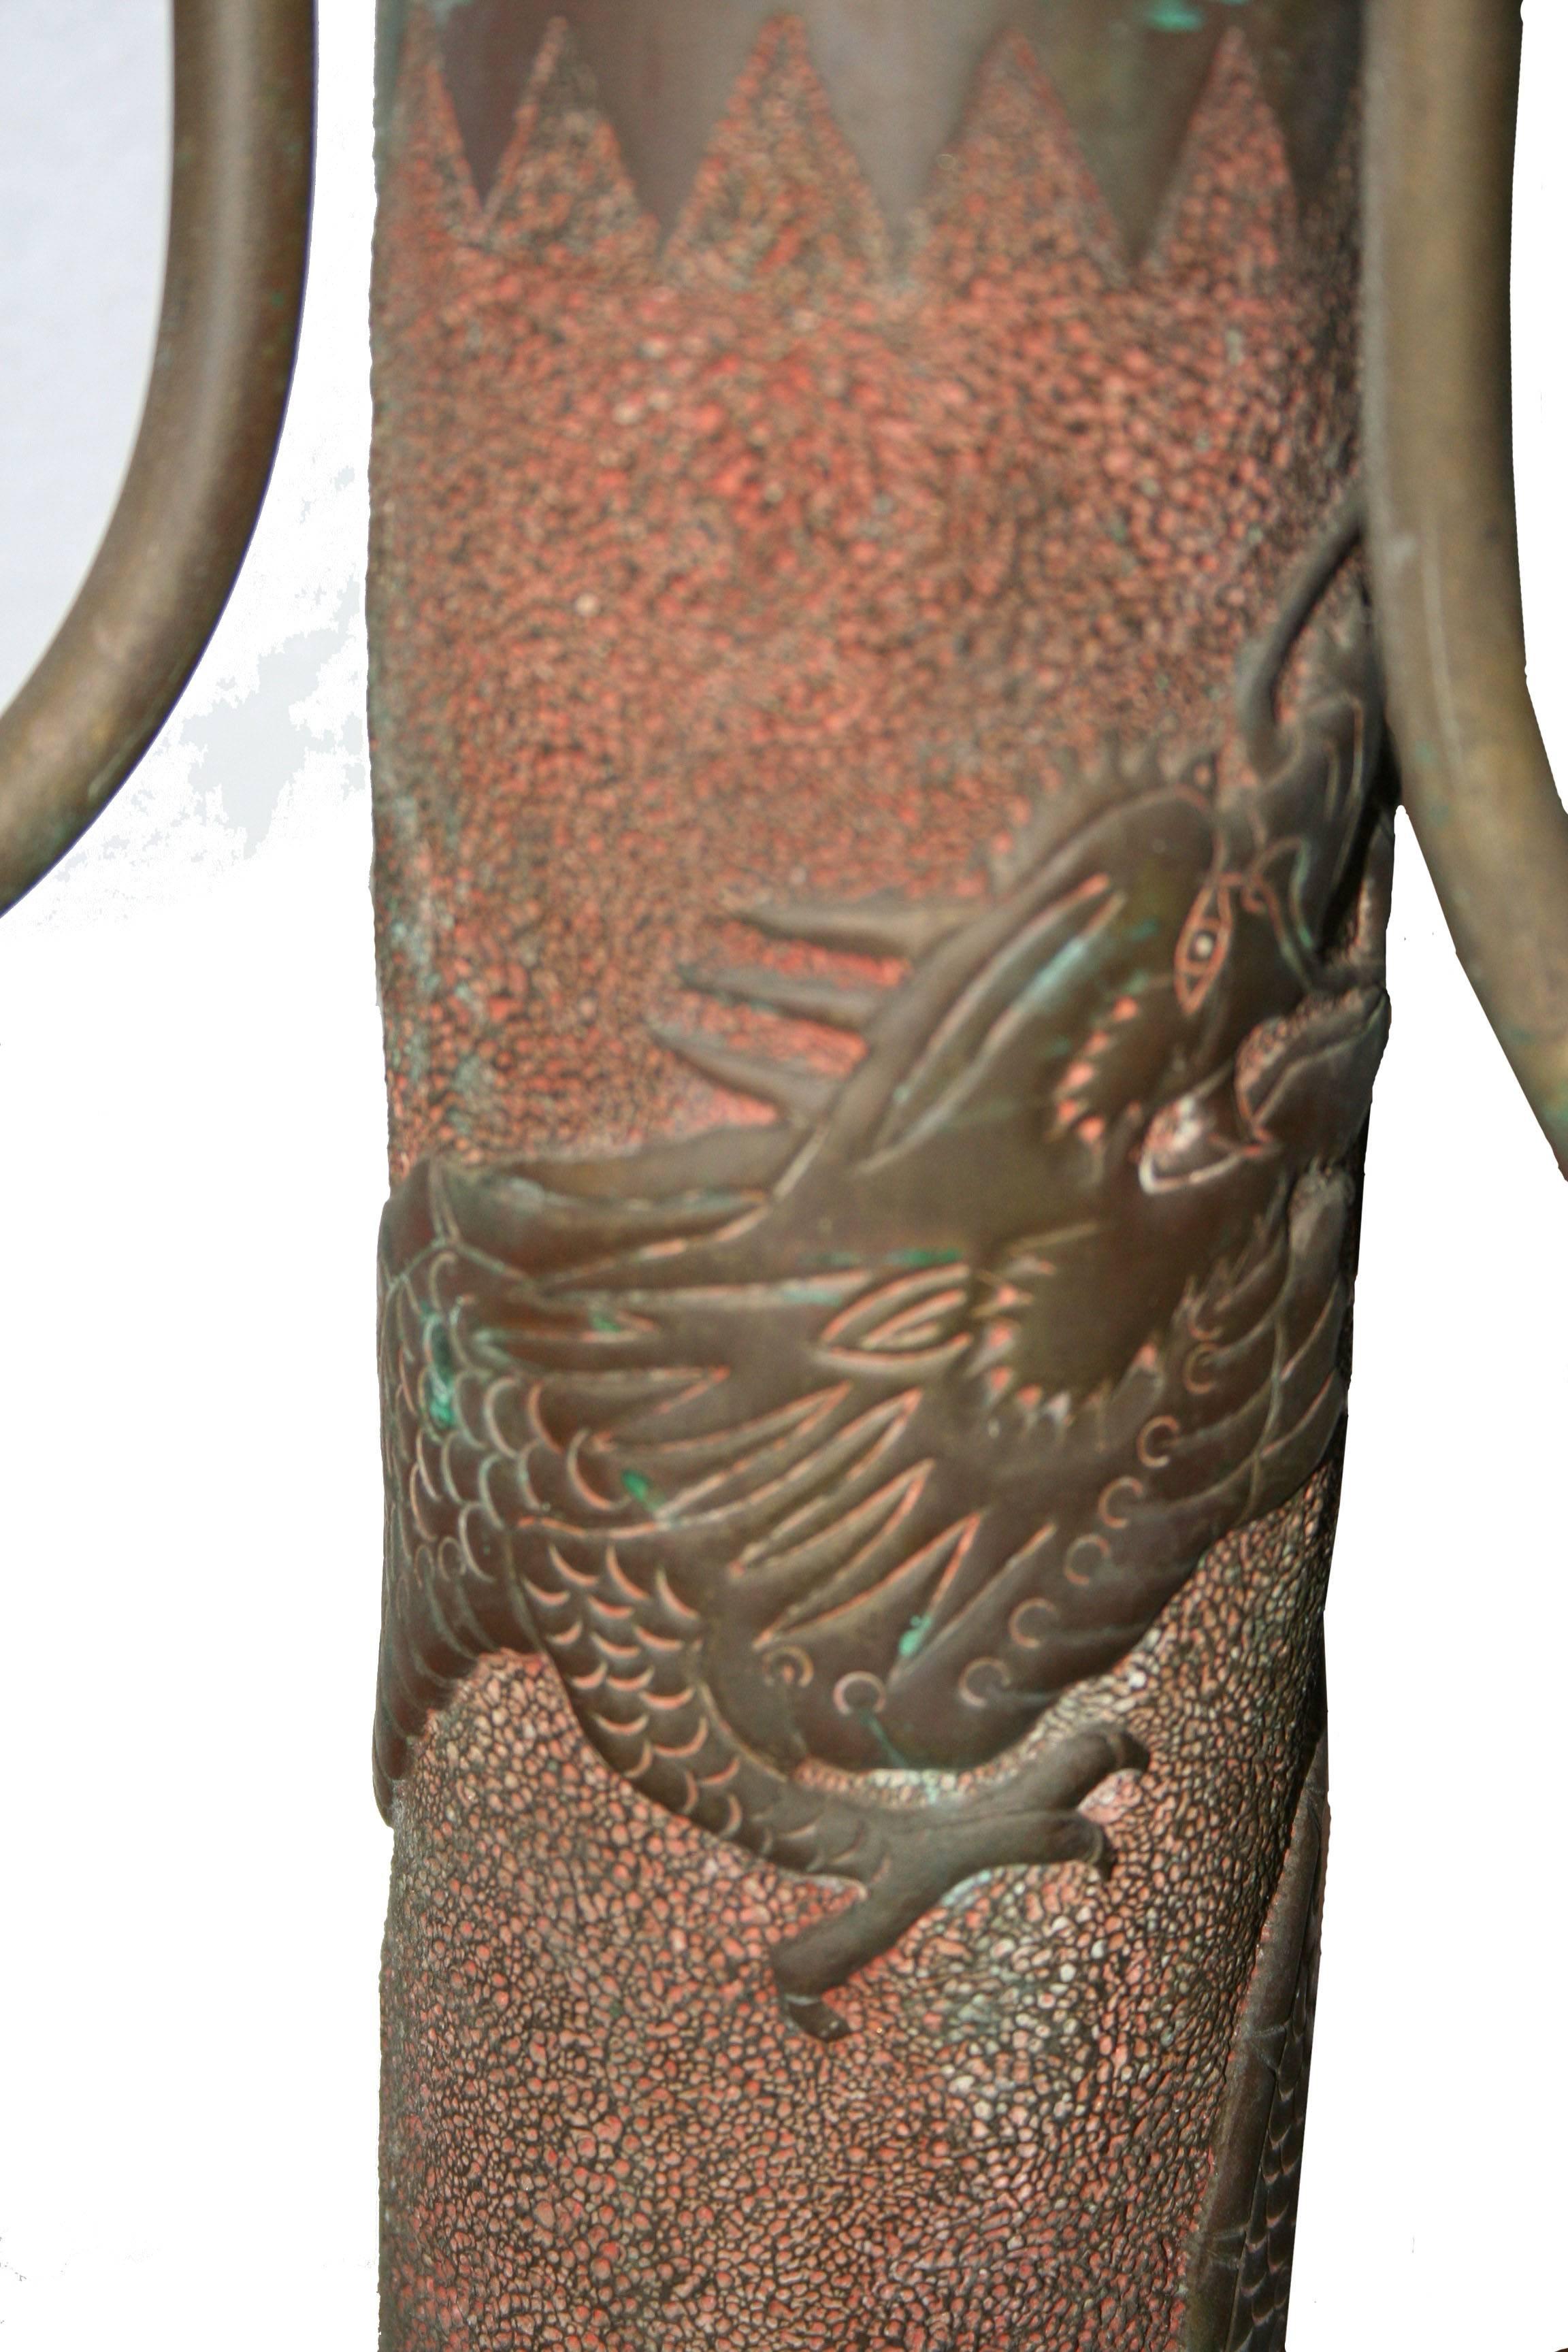 Made from a 3" (76.2MM) WWI artillery shell is this heavily embellished WWI trench art lamp with three arms. Lovely original patina with image of a dragon, done in relief, wrapping around the lamp. The surrounding area is textured, with upper